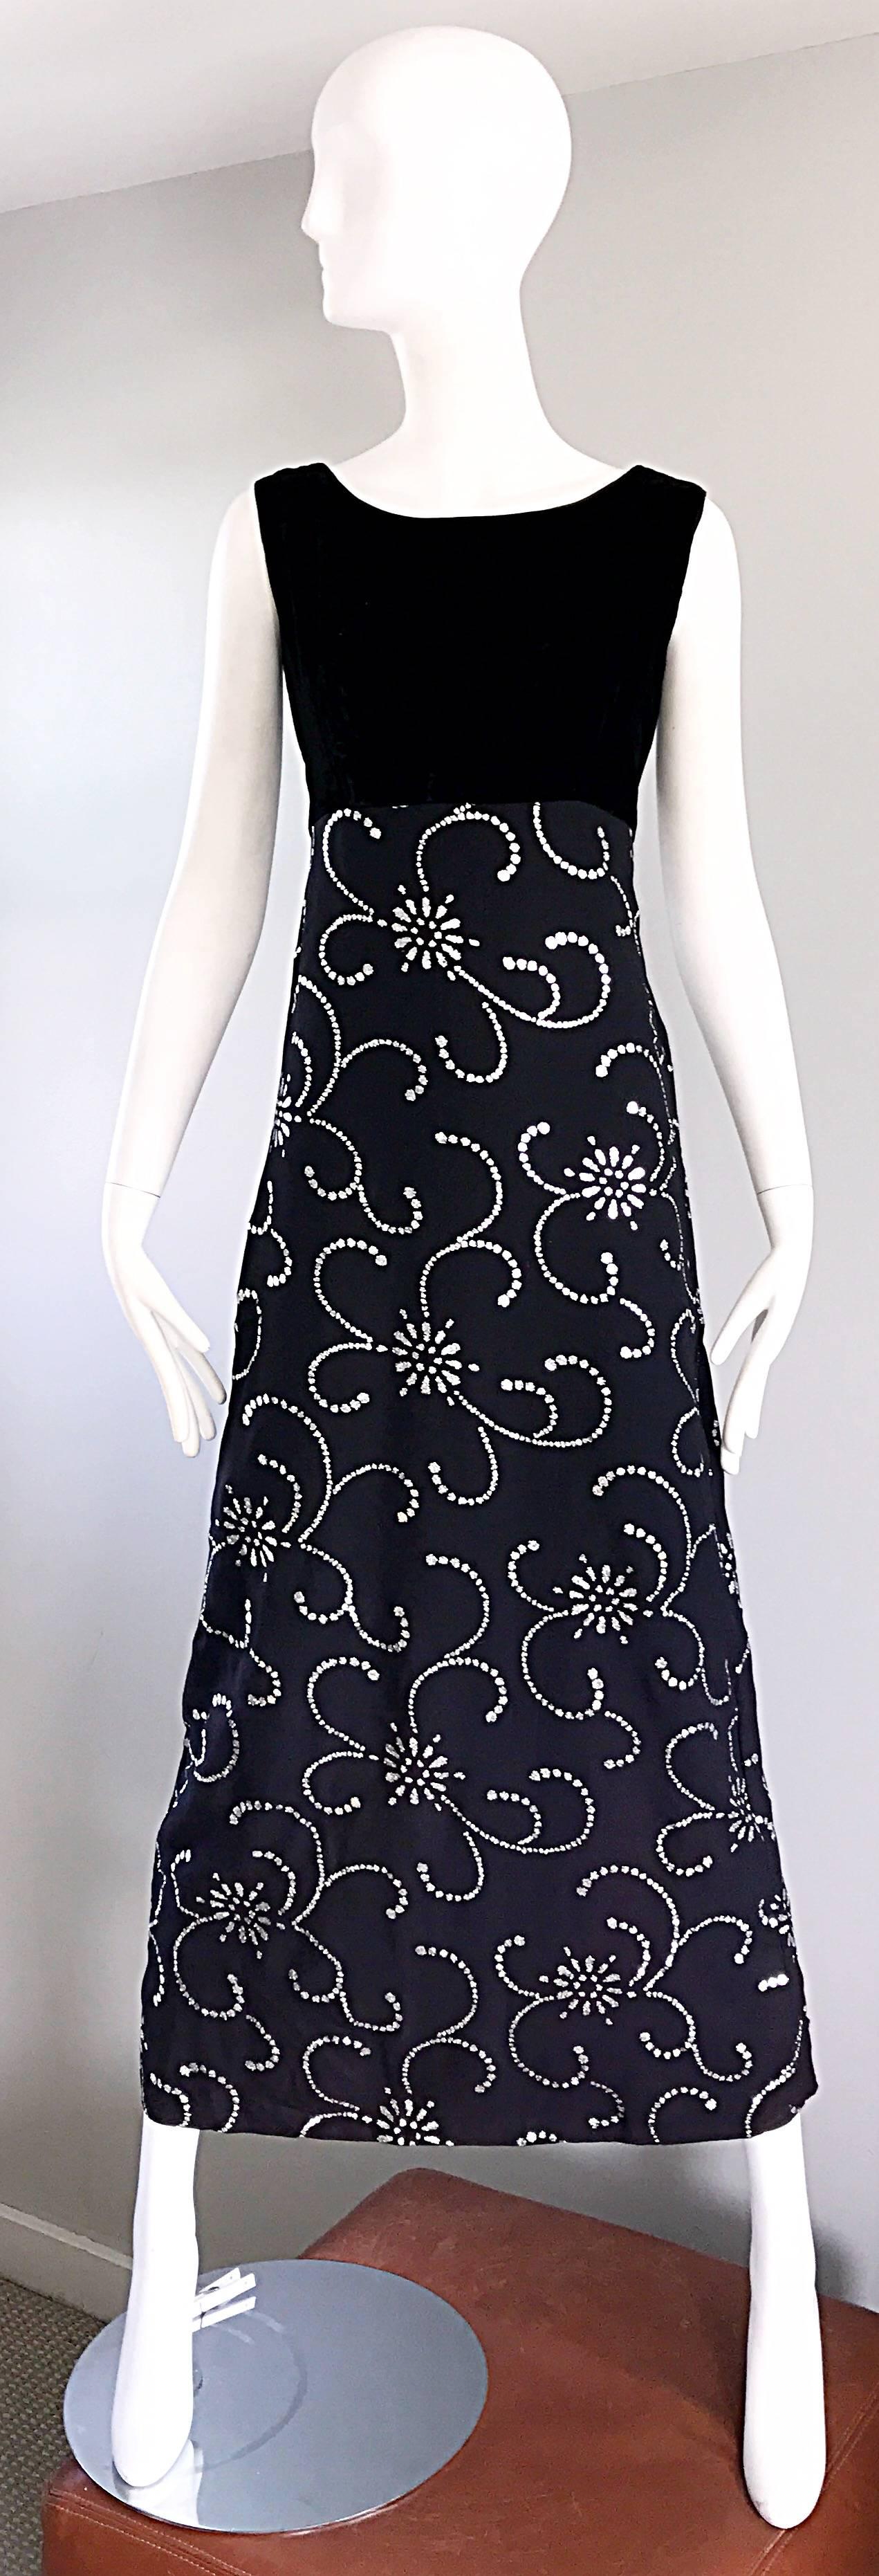 Gorgeous early 1970s black and silver glitter maxi dress or gown! Features a fitted black silk velvet bodice, with a rayon crepe full skirt. Silver glitter throughout creates a wonderful symmetrical print. Slit up the center back hem reveals just